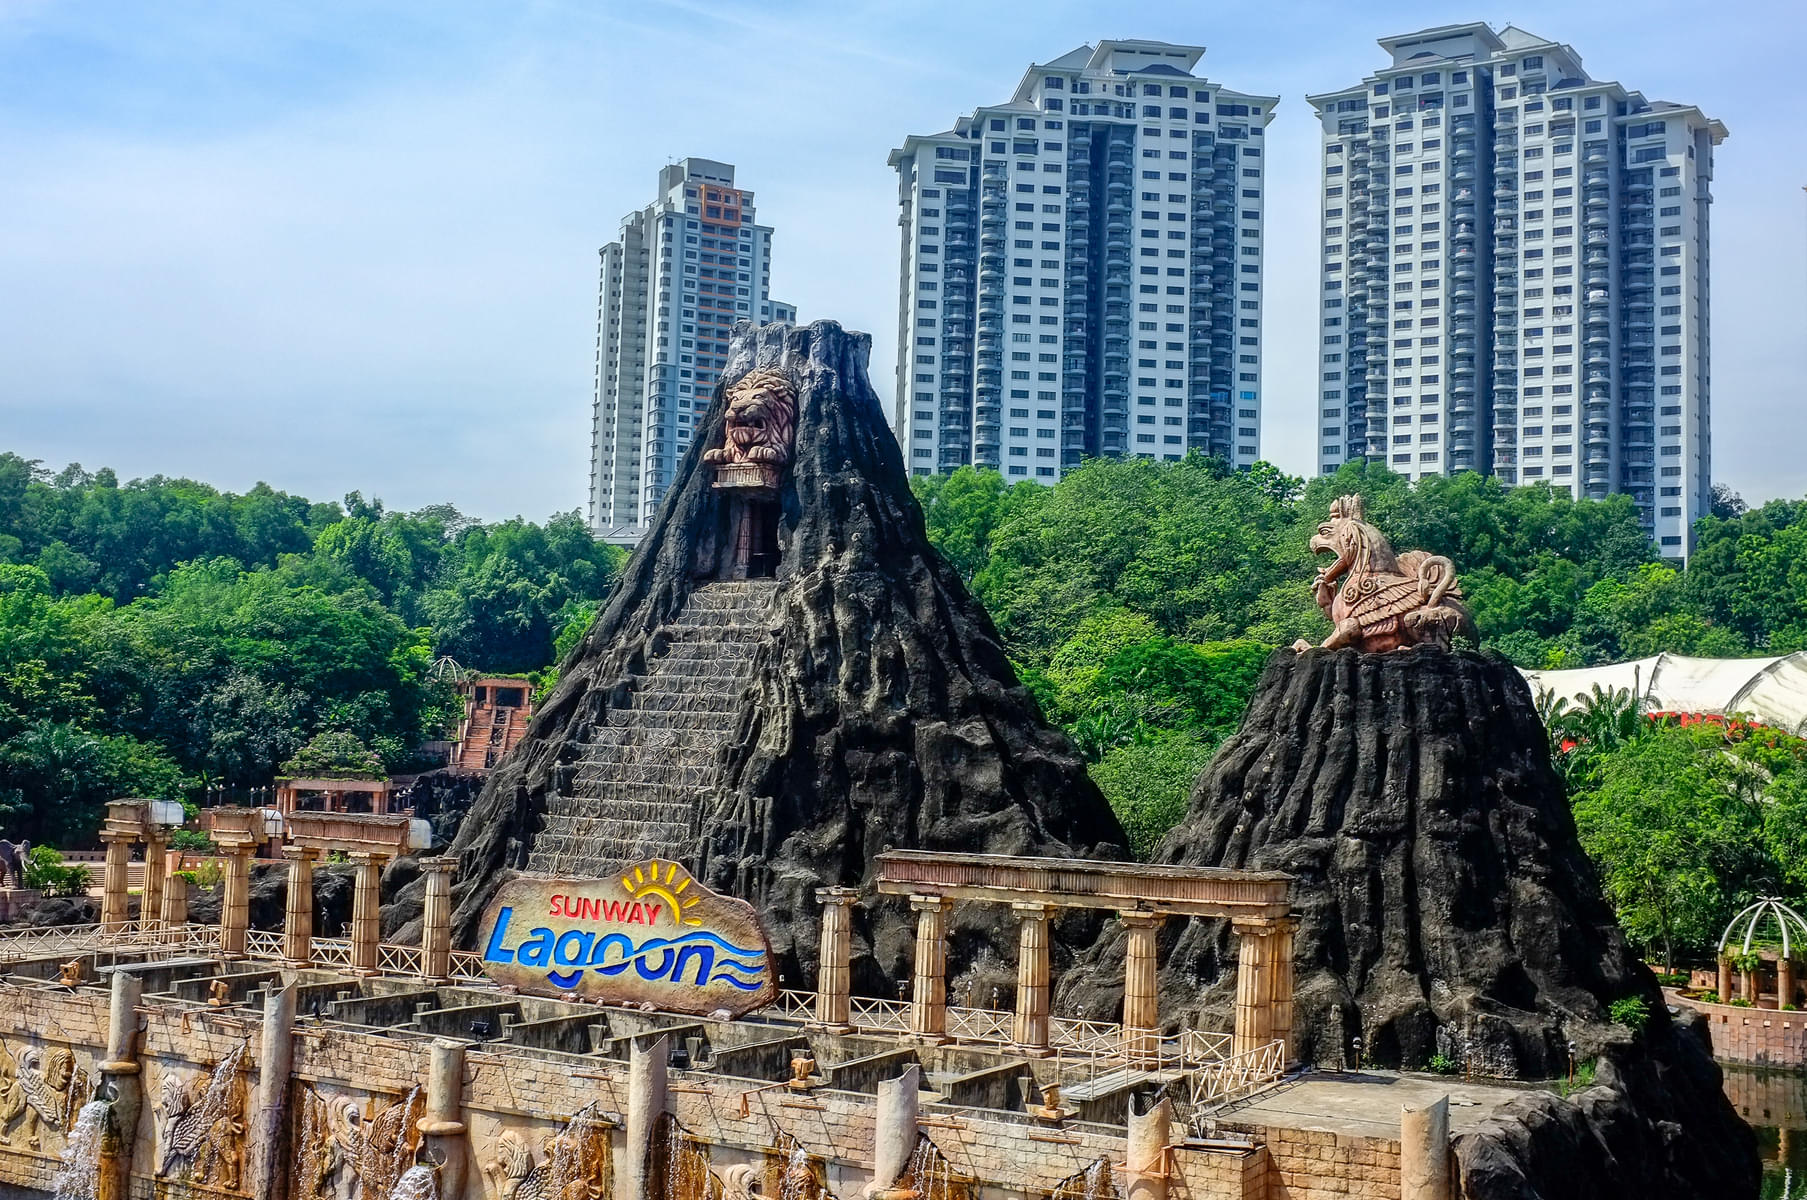 Have a memorable day at Sunway Lagoon & enjoying world-class rides there